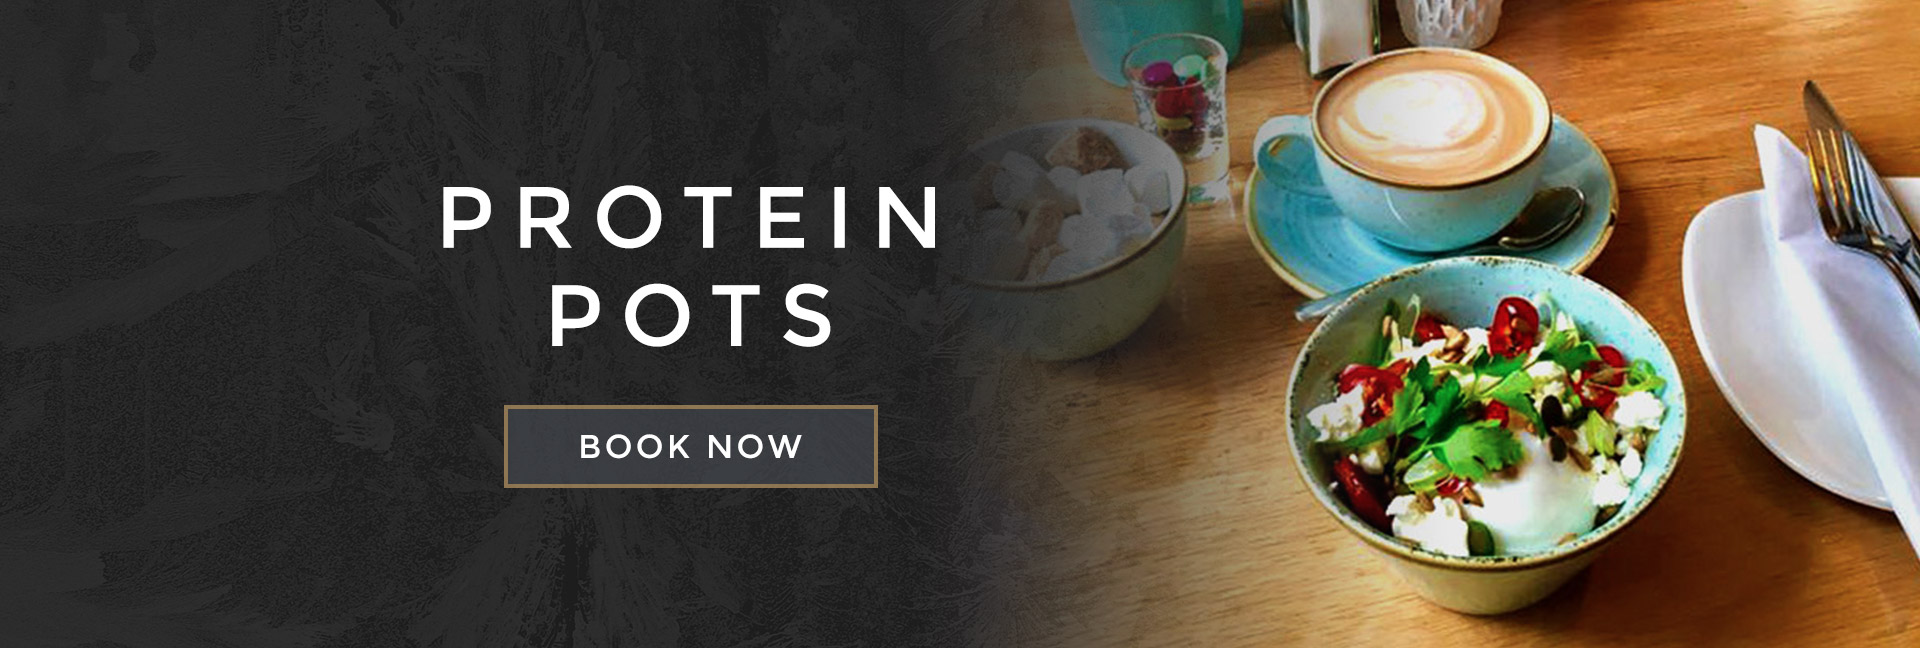 Protein pots at All Bar One Wimbledon - Book your table